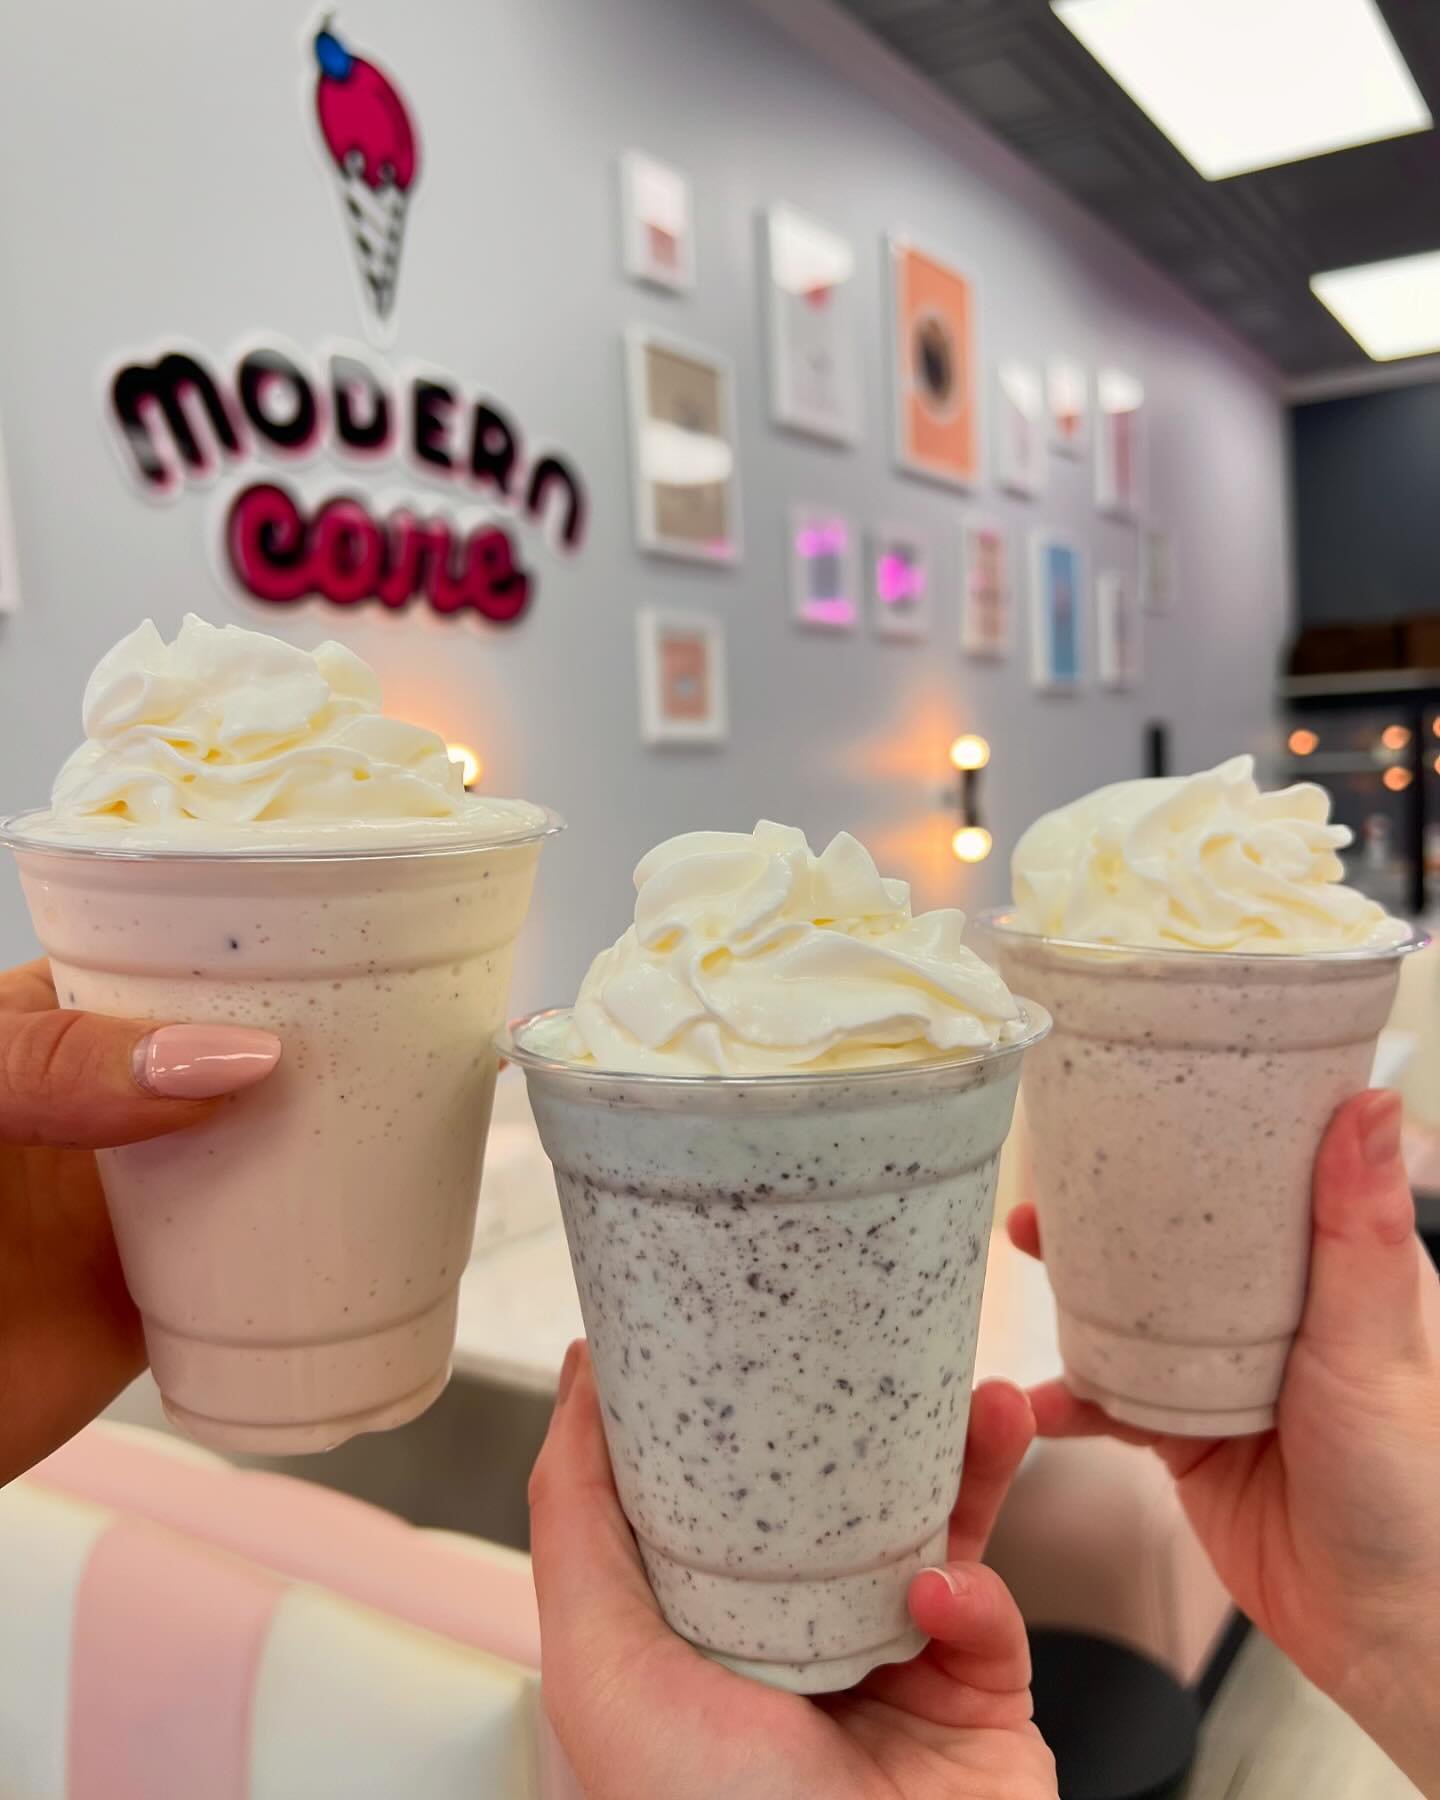 your favorite shakes! 🍦 
cookie dough, mint, &amp; oreo 

which are you picking??

📍 @moderncone